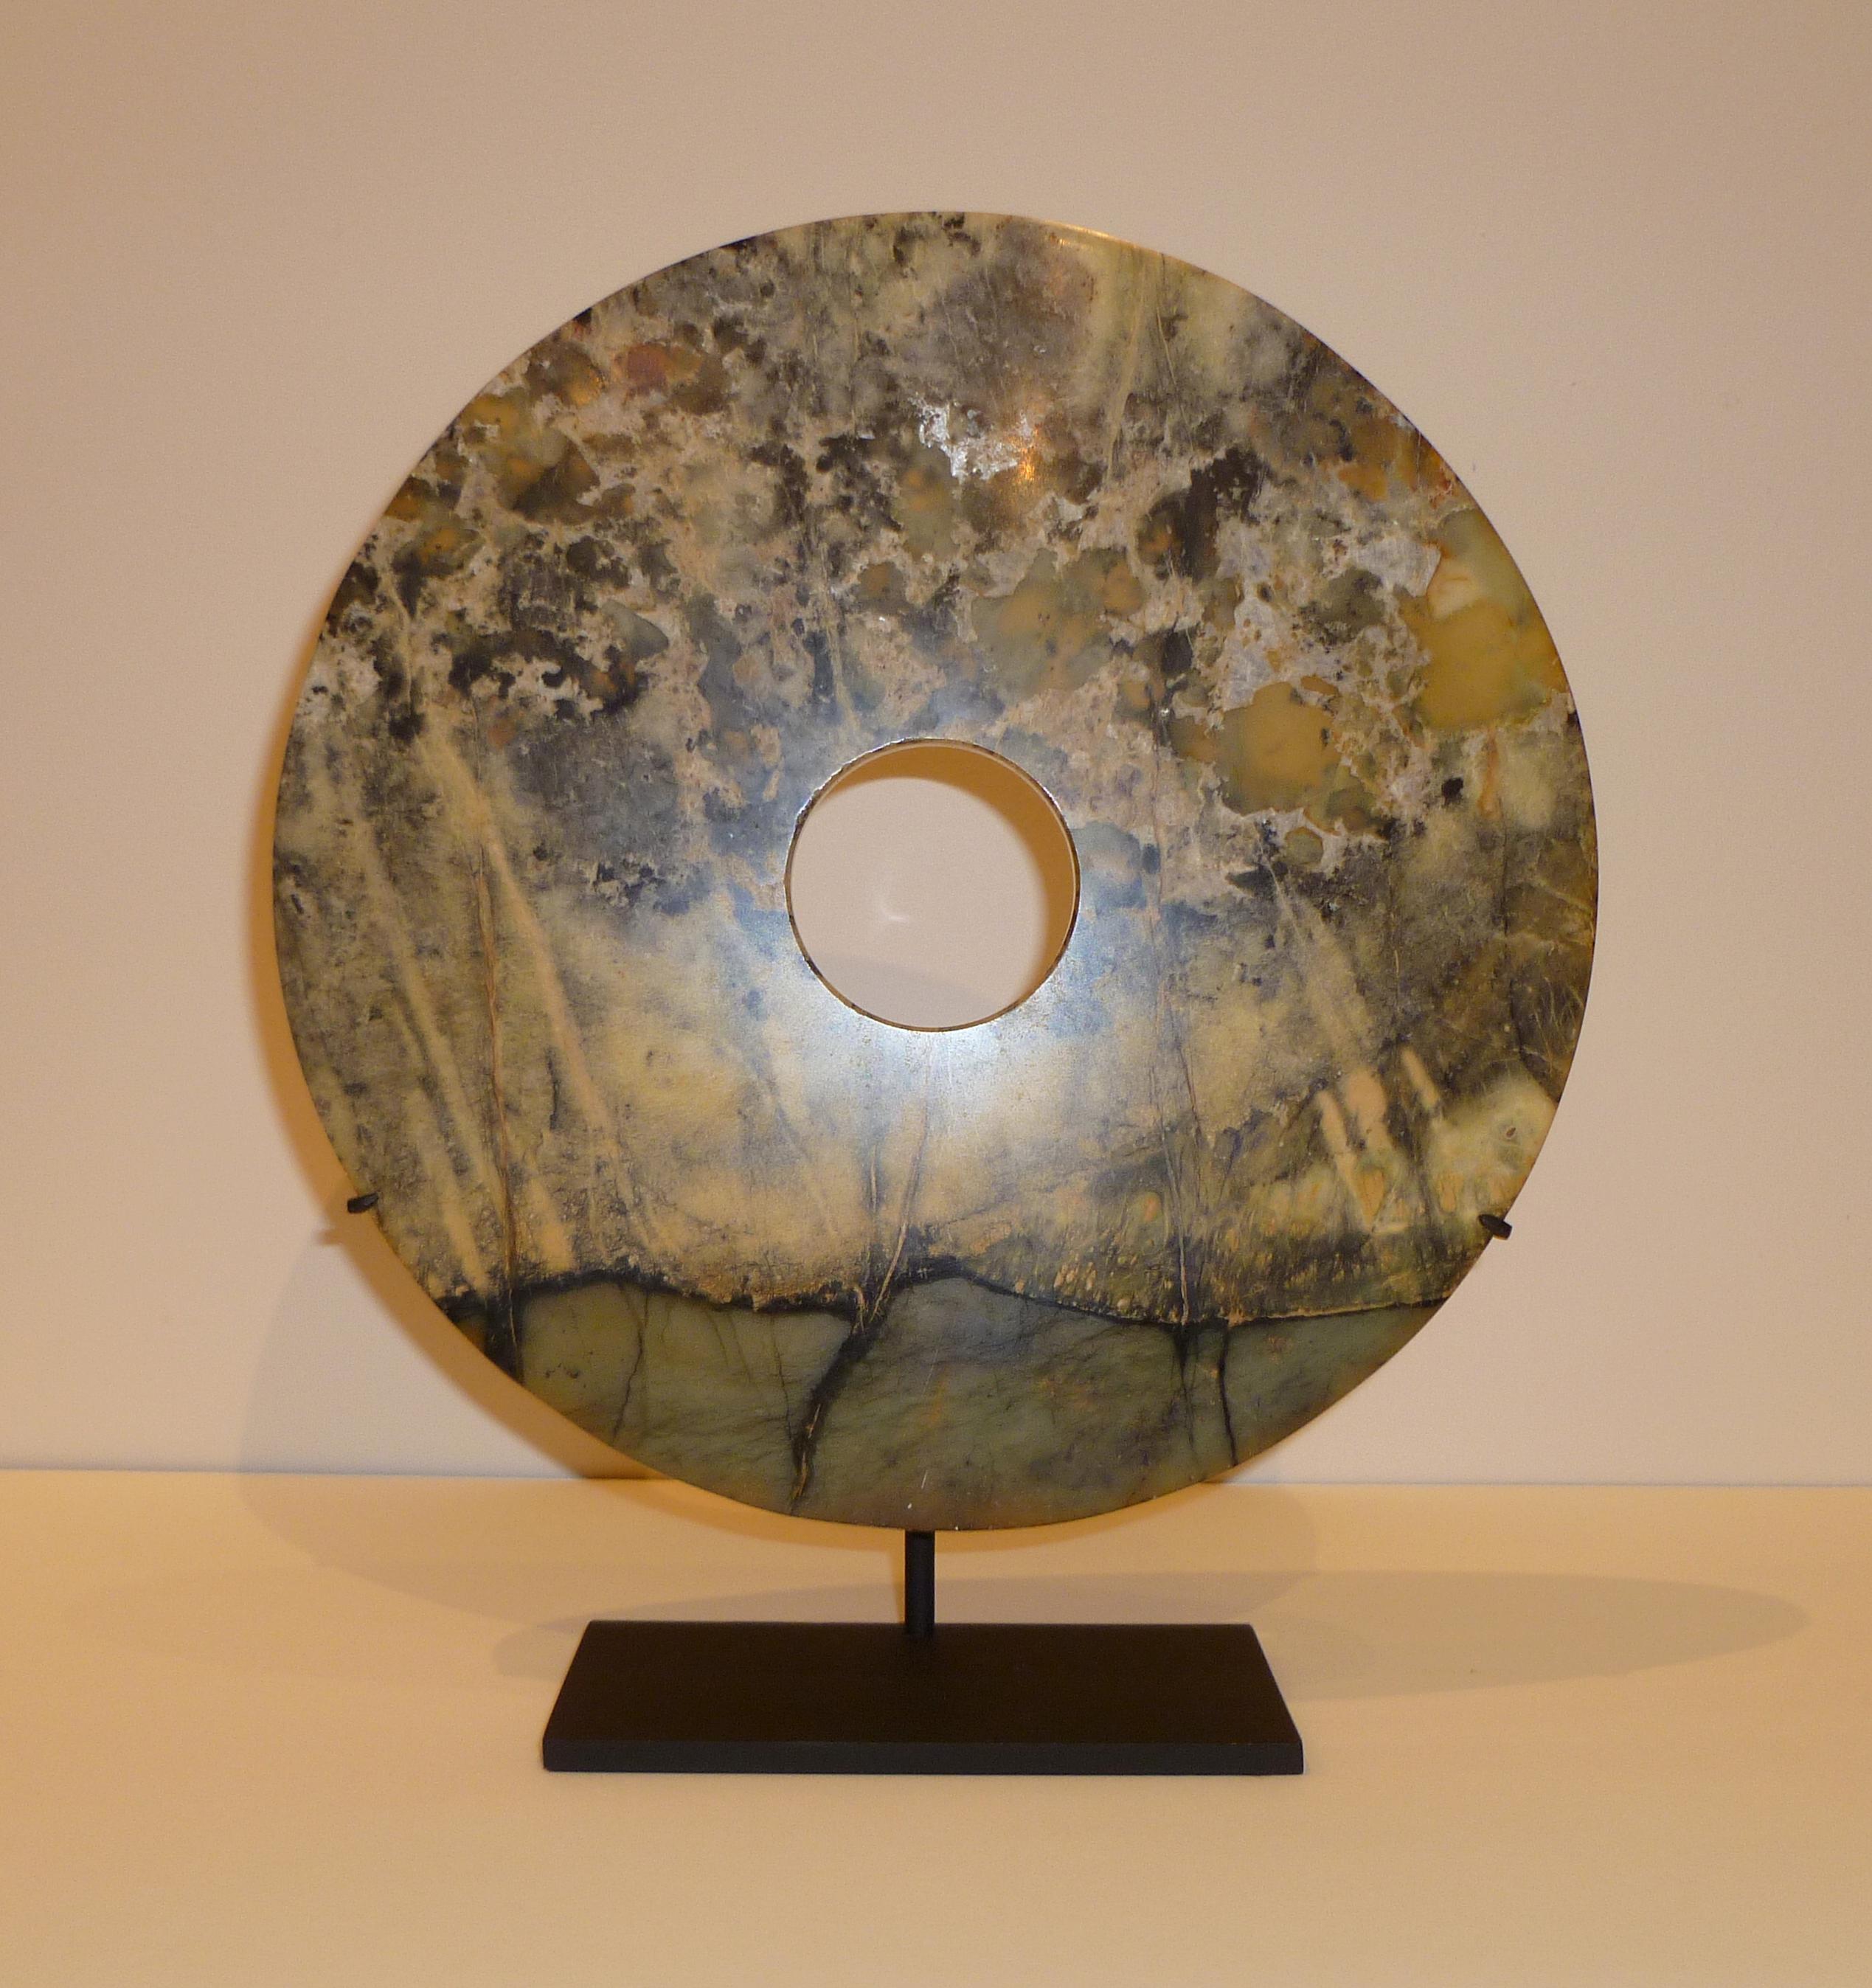 Fine Chinese hard stone disc on black metal stand, beautiful form, color and texture. 10